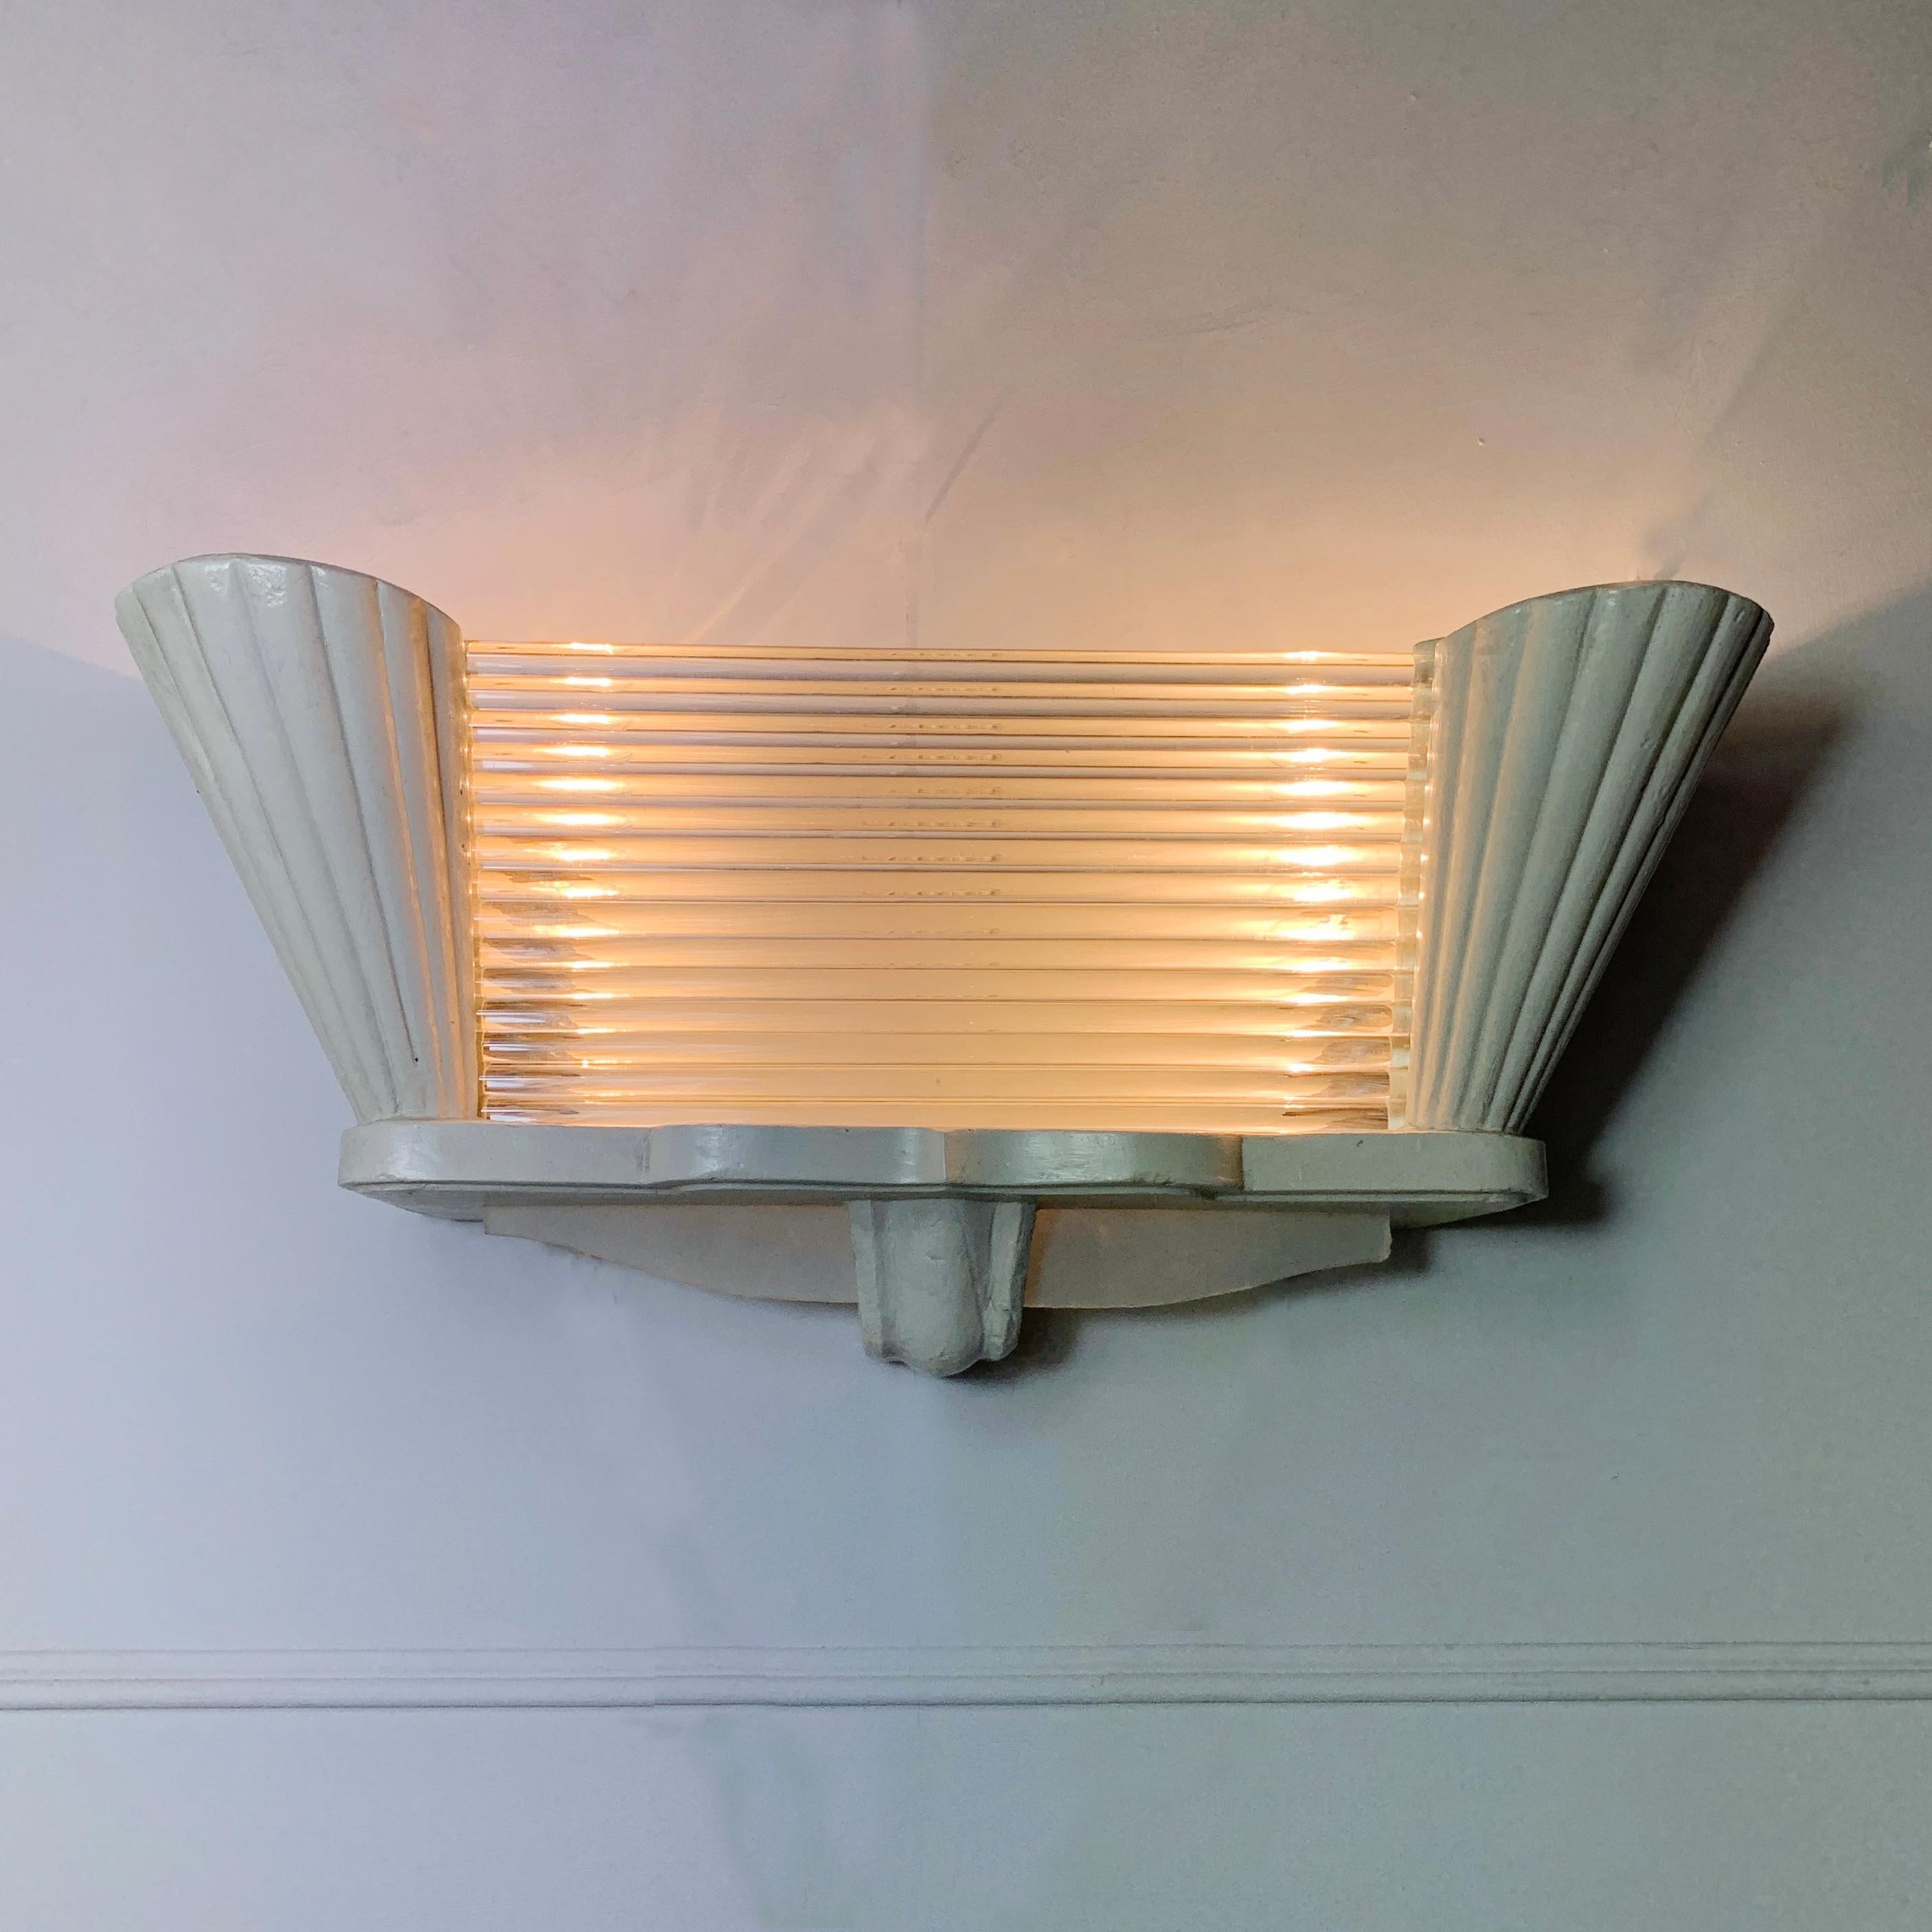 1940s Art Deco wall light from the French Design House Arlus
Individual glass rods sit within the plasterwork body lit from behind by two light fittings
While handcut glass deco fans adorn the bottom of the light
Stamped Arlus decal clearly